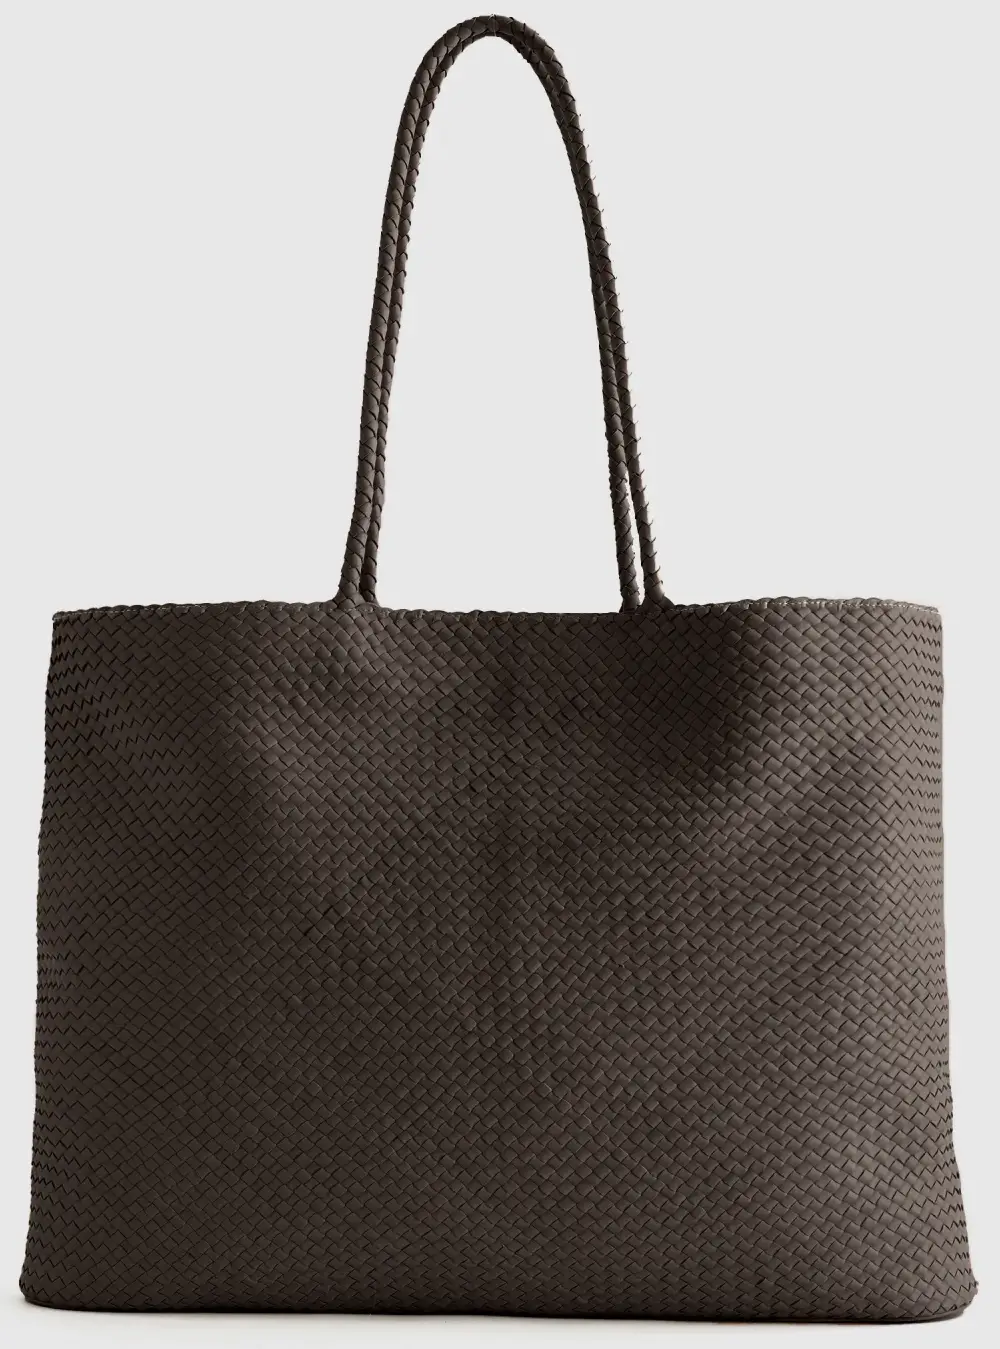 Quince Italian Leather Handwoven Tote